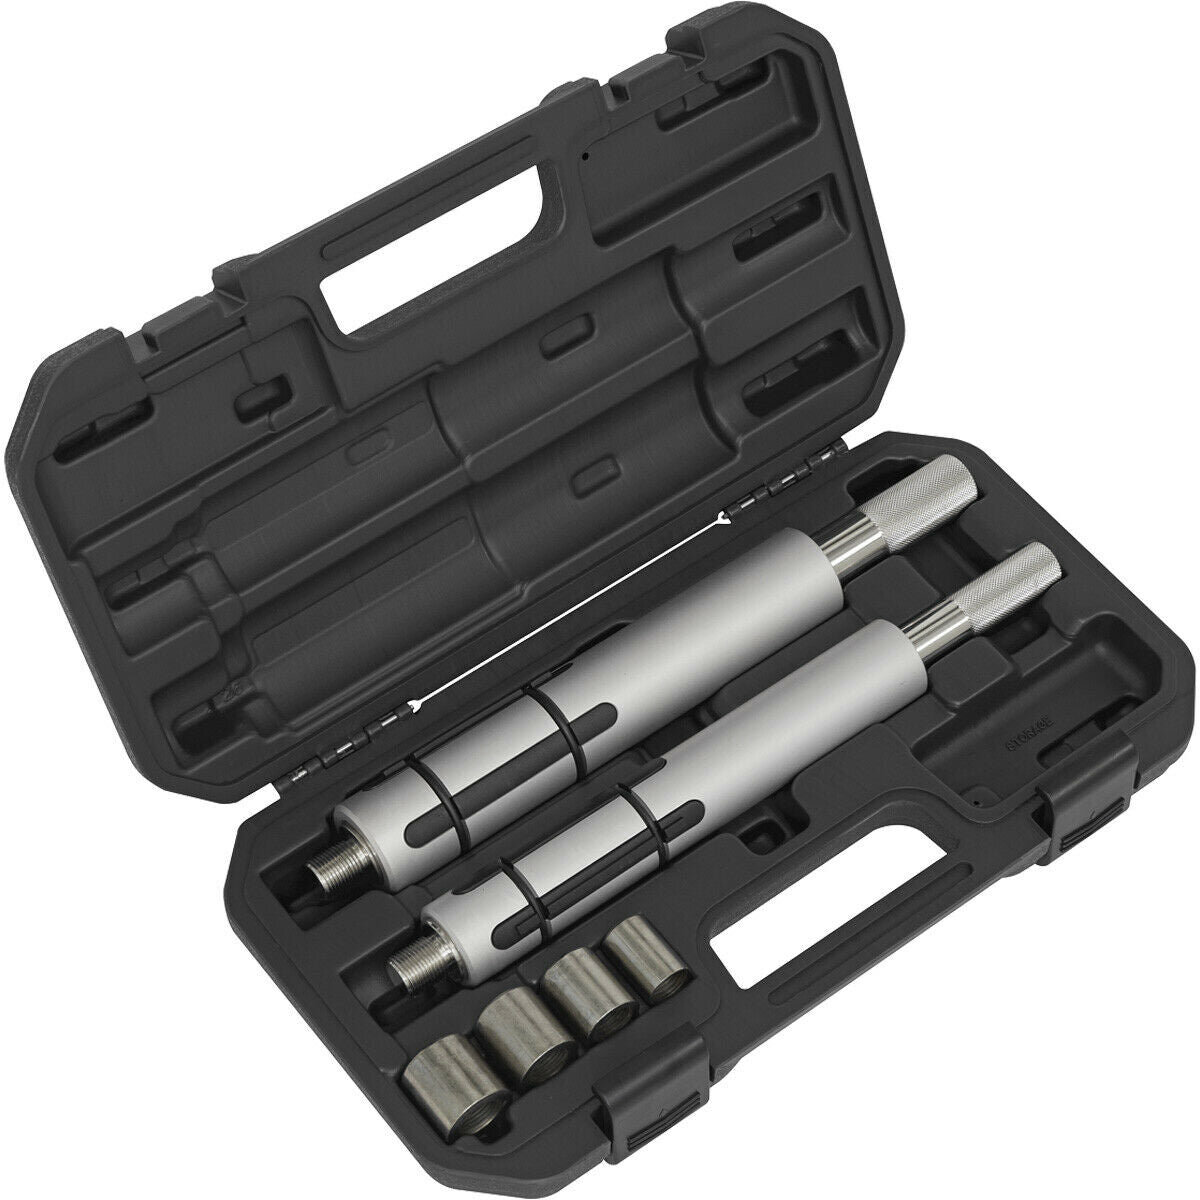 Clutch Alignment Tool Set - Suitable for Commercial Vehicles - Screw Action